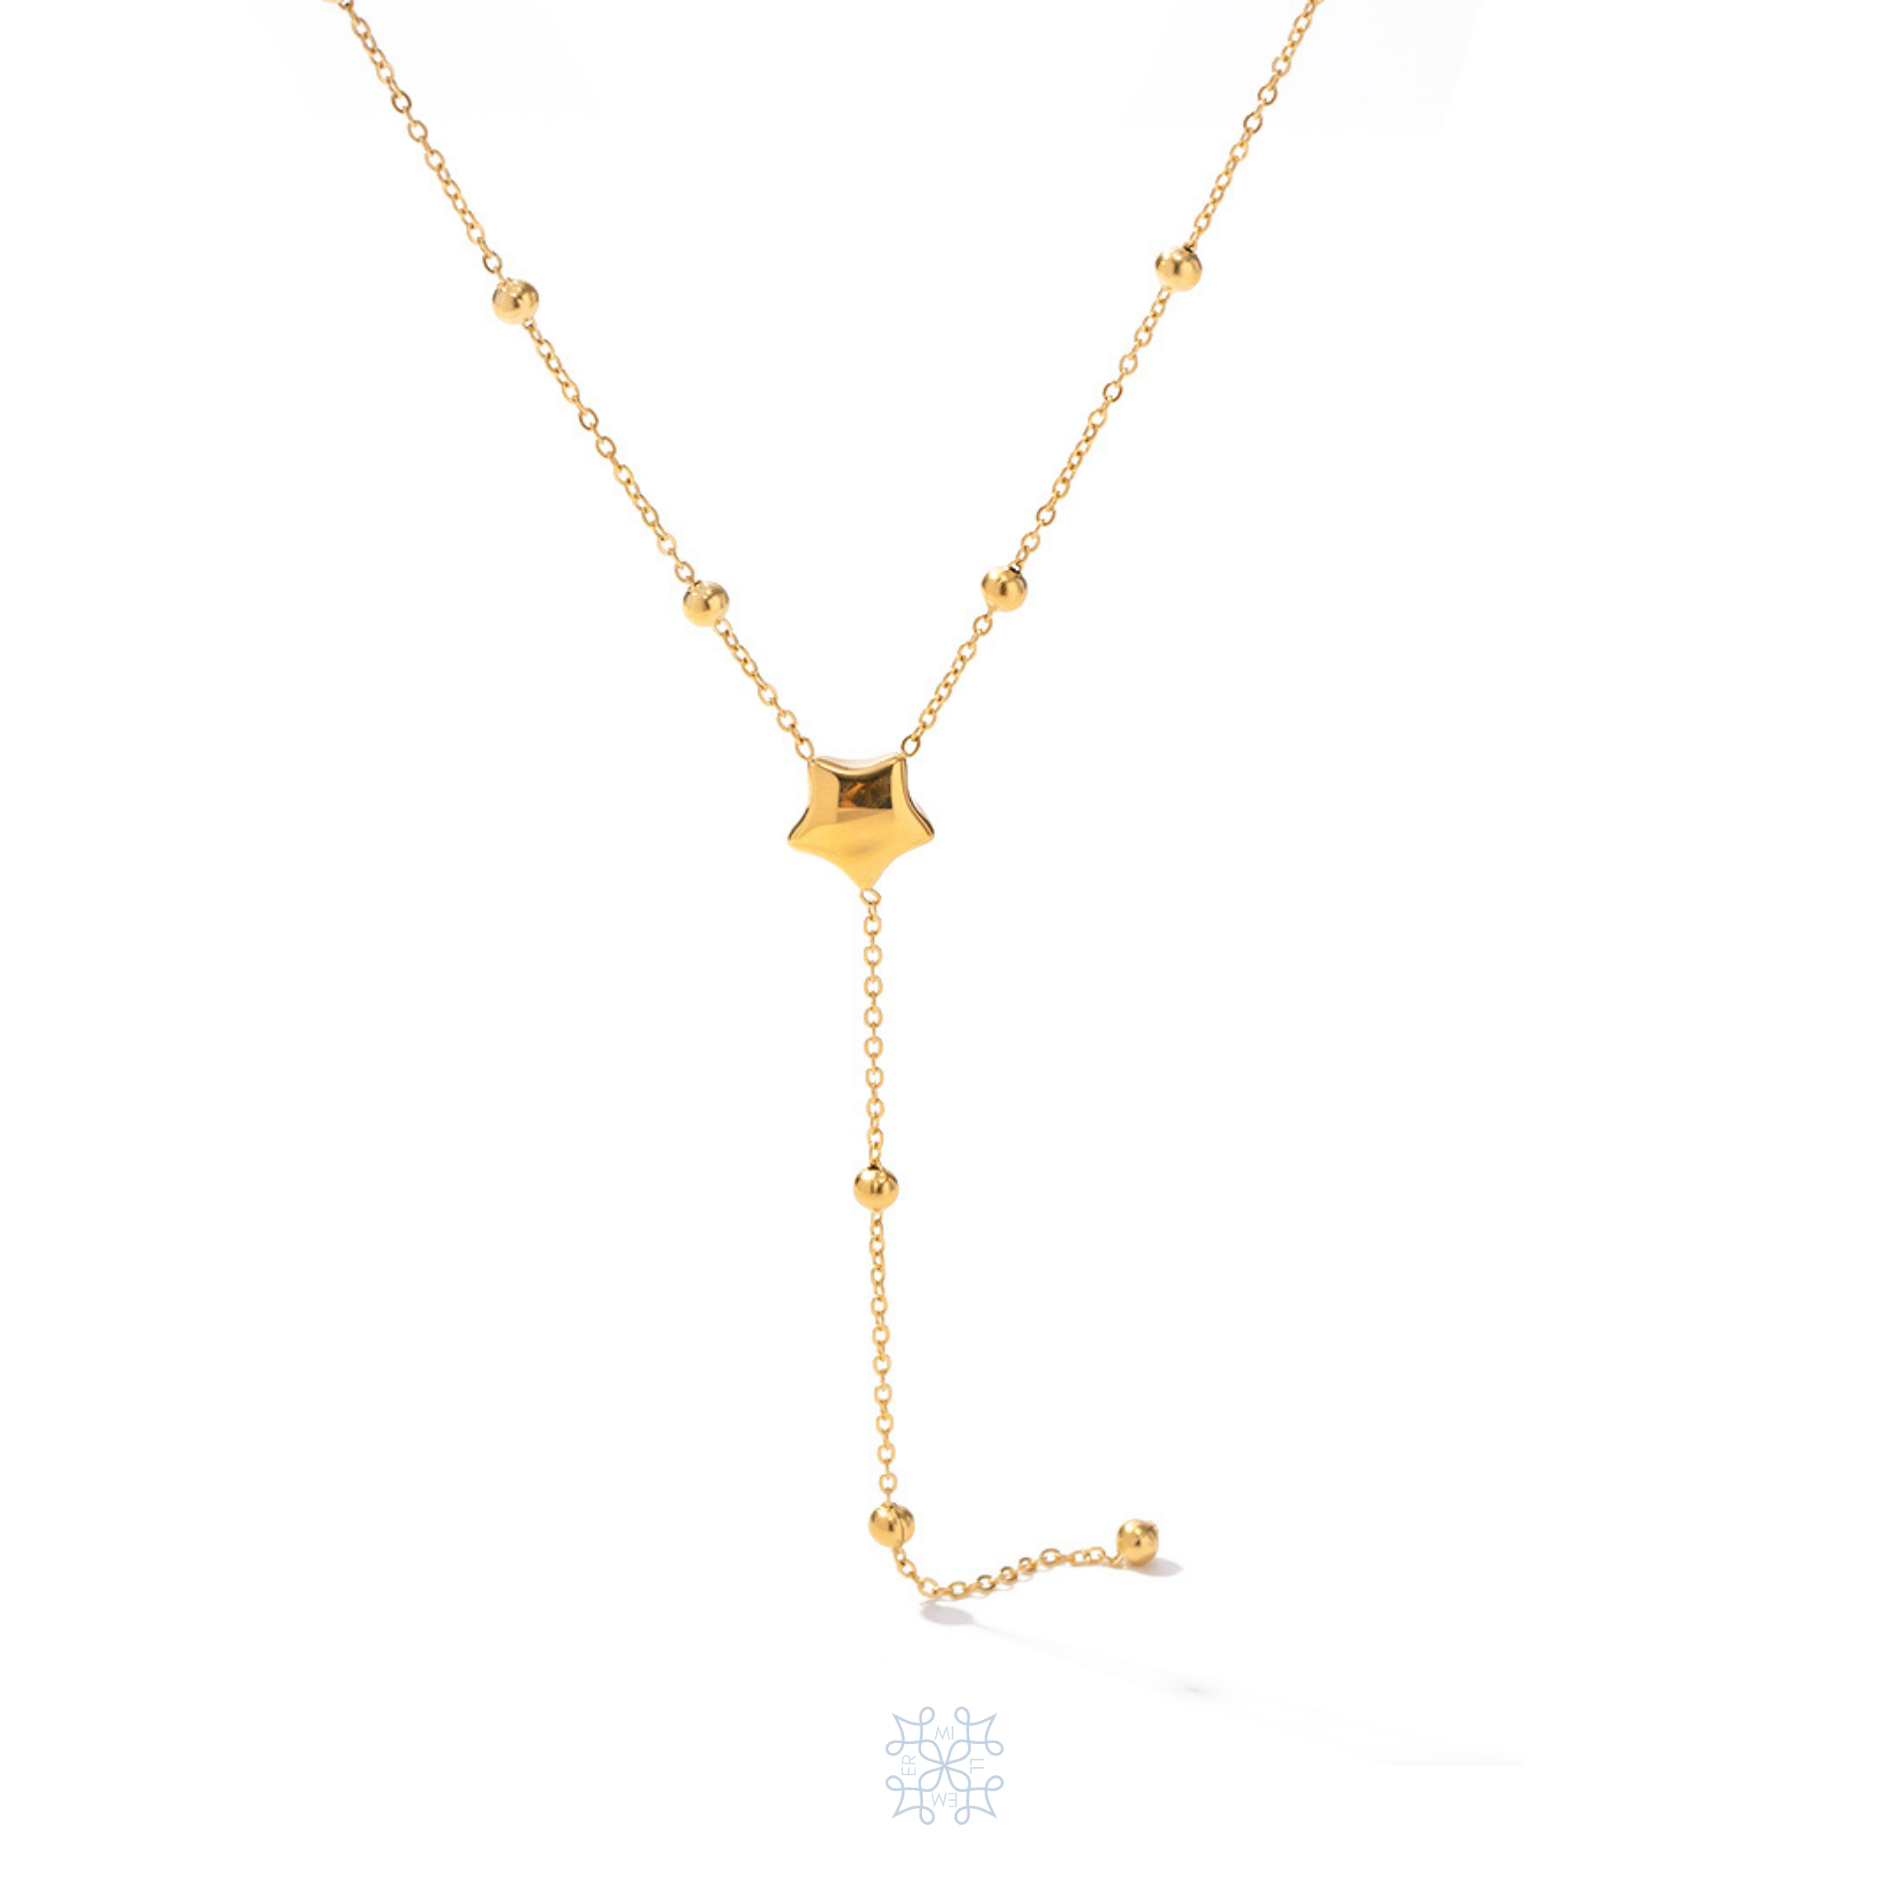 ETOILE Dainty Chain Necklace